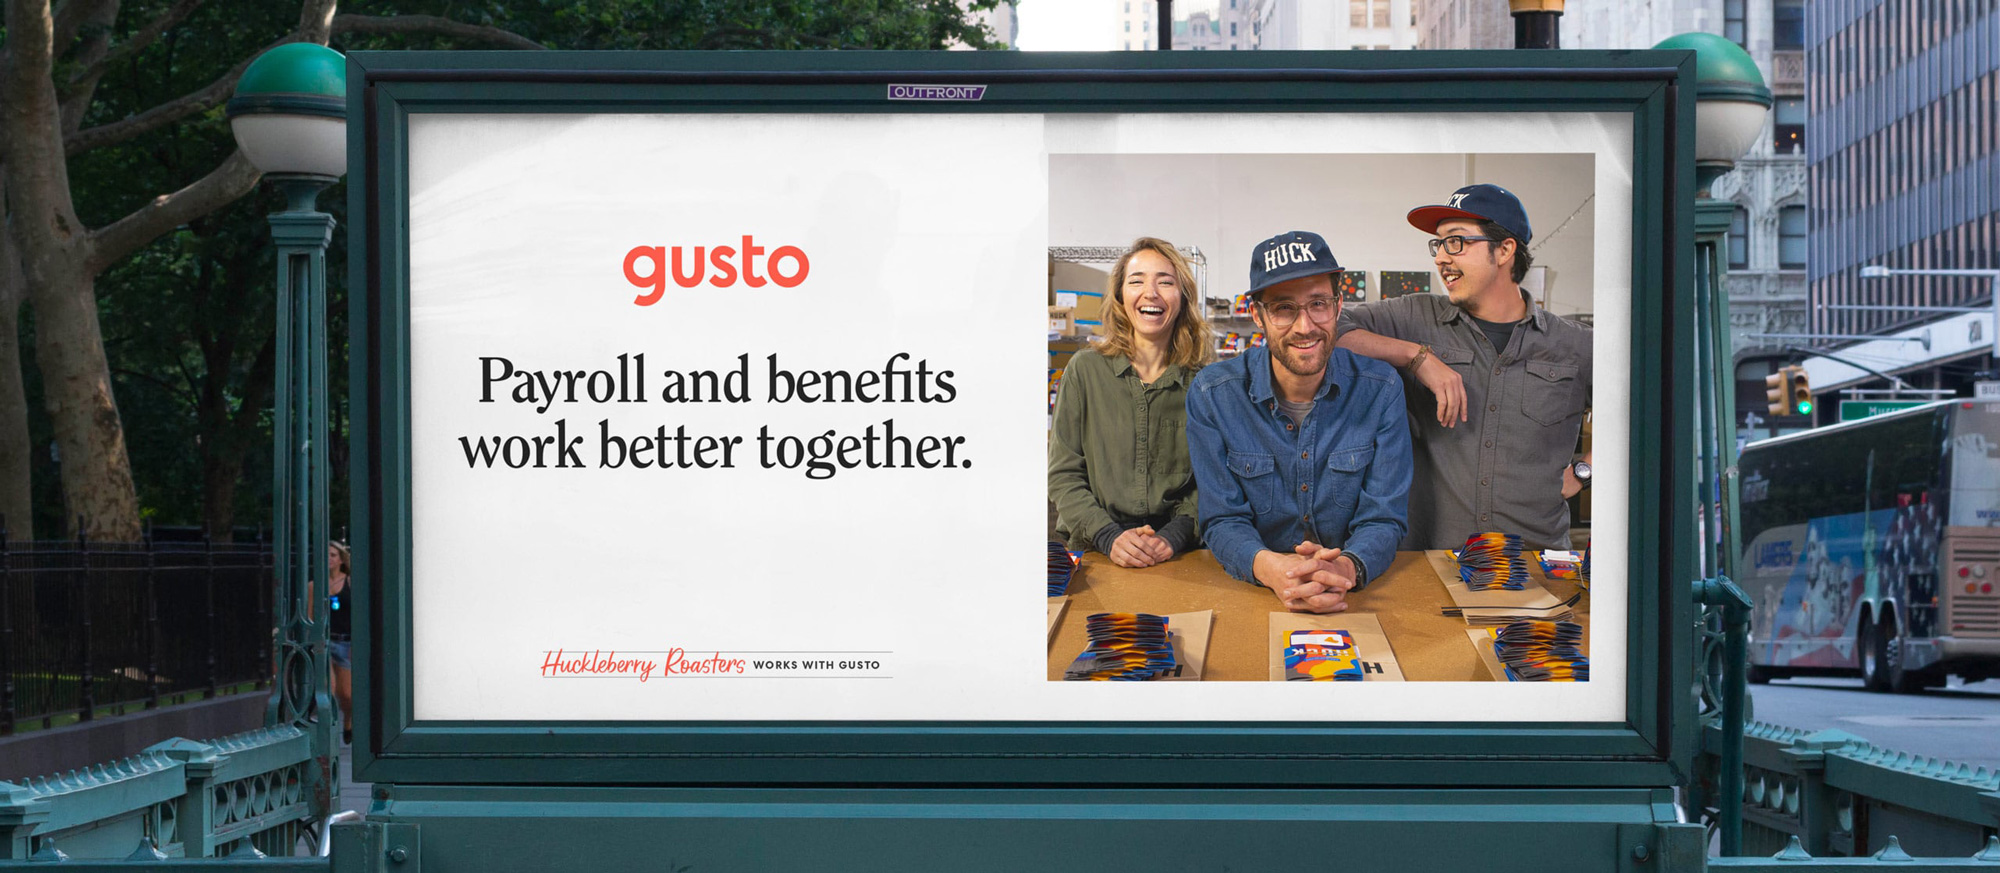 New Logo and Identity for Gusto done In-house